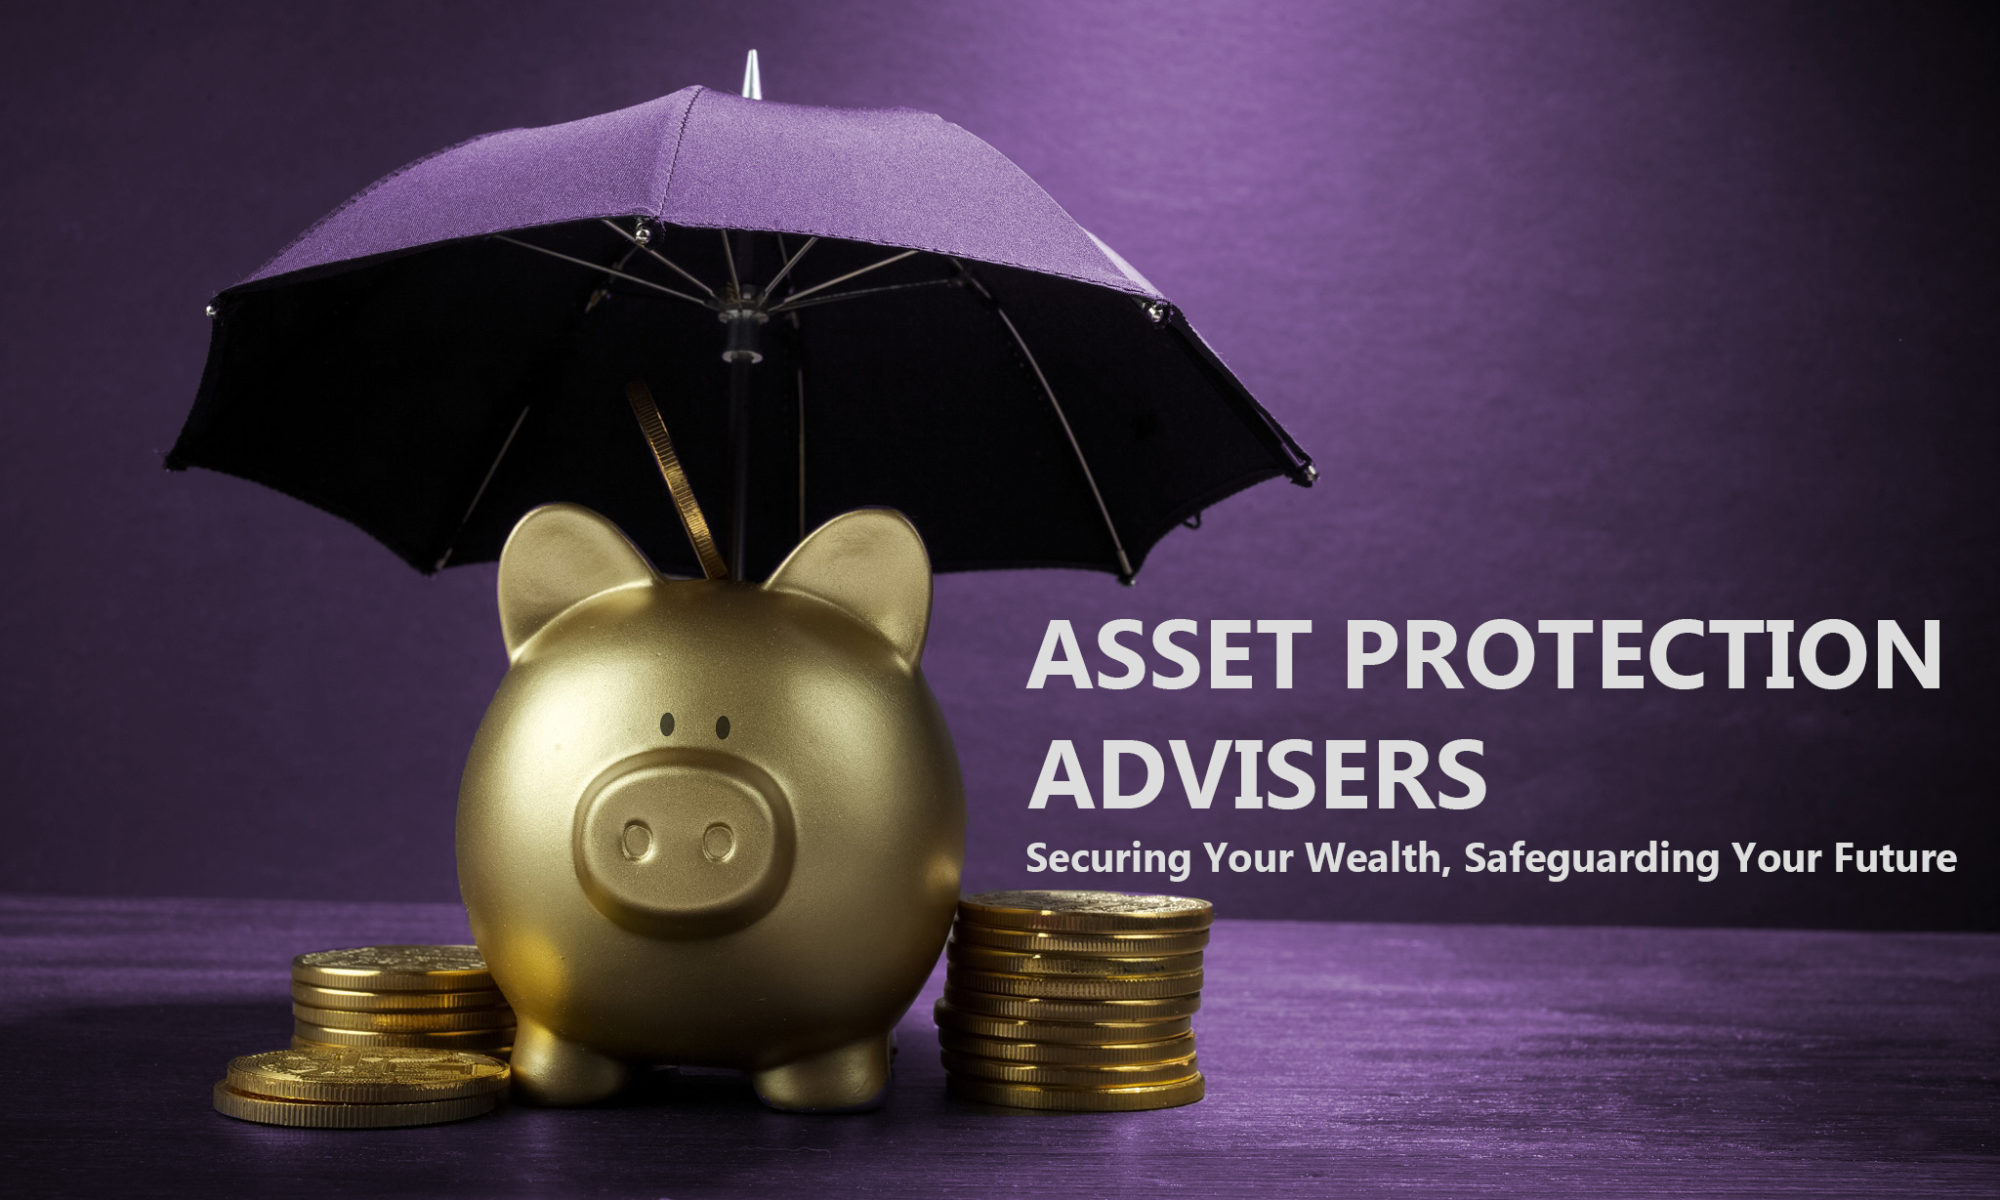 Asset Protection Advisers